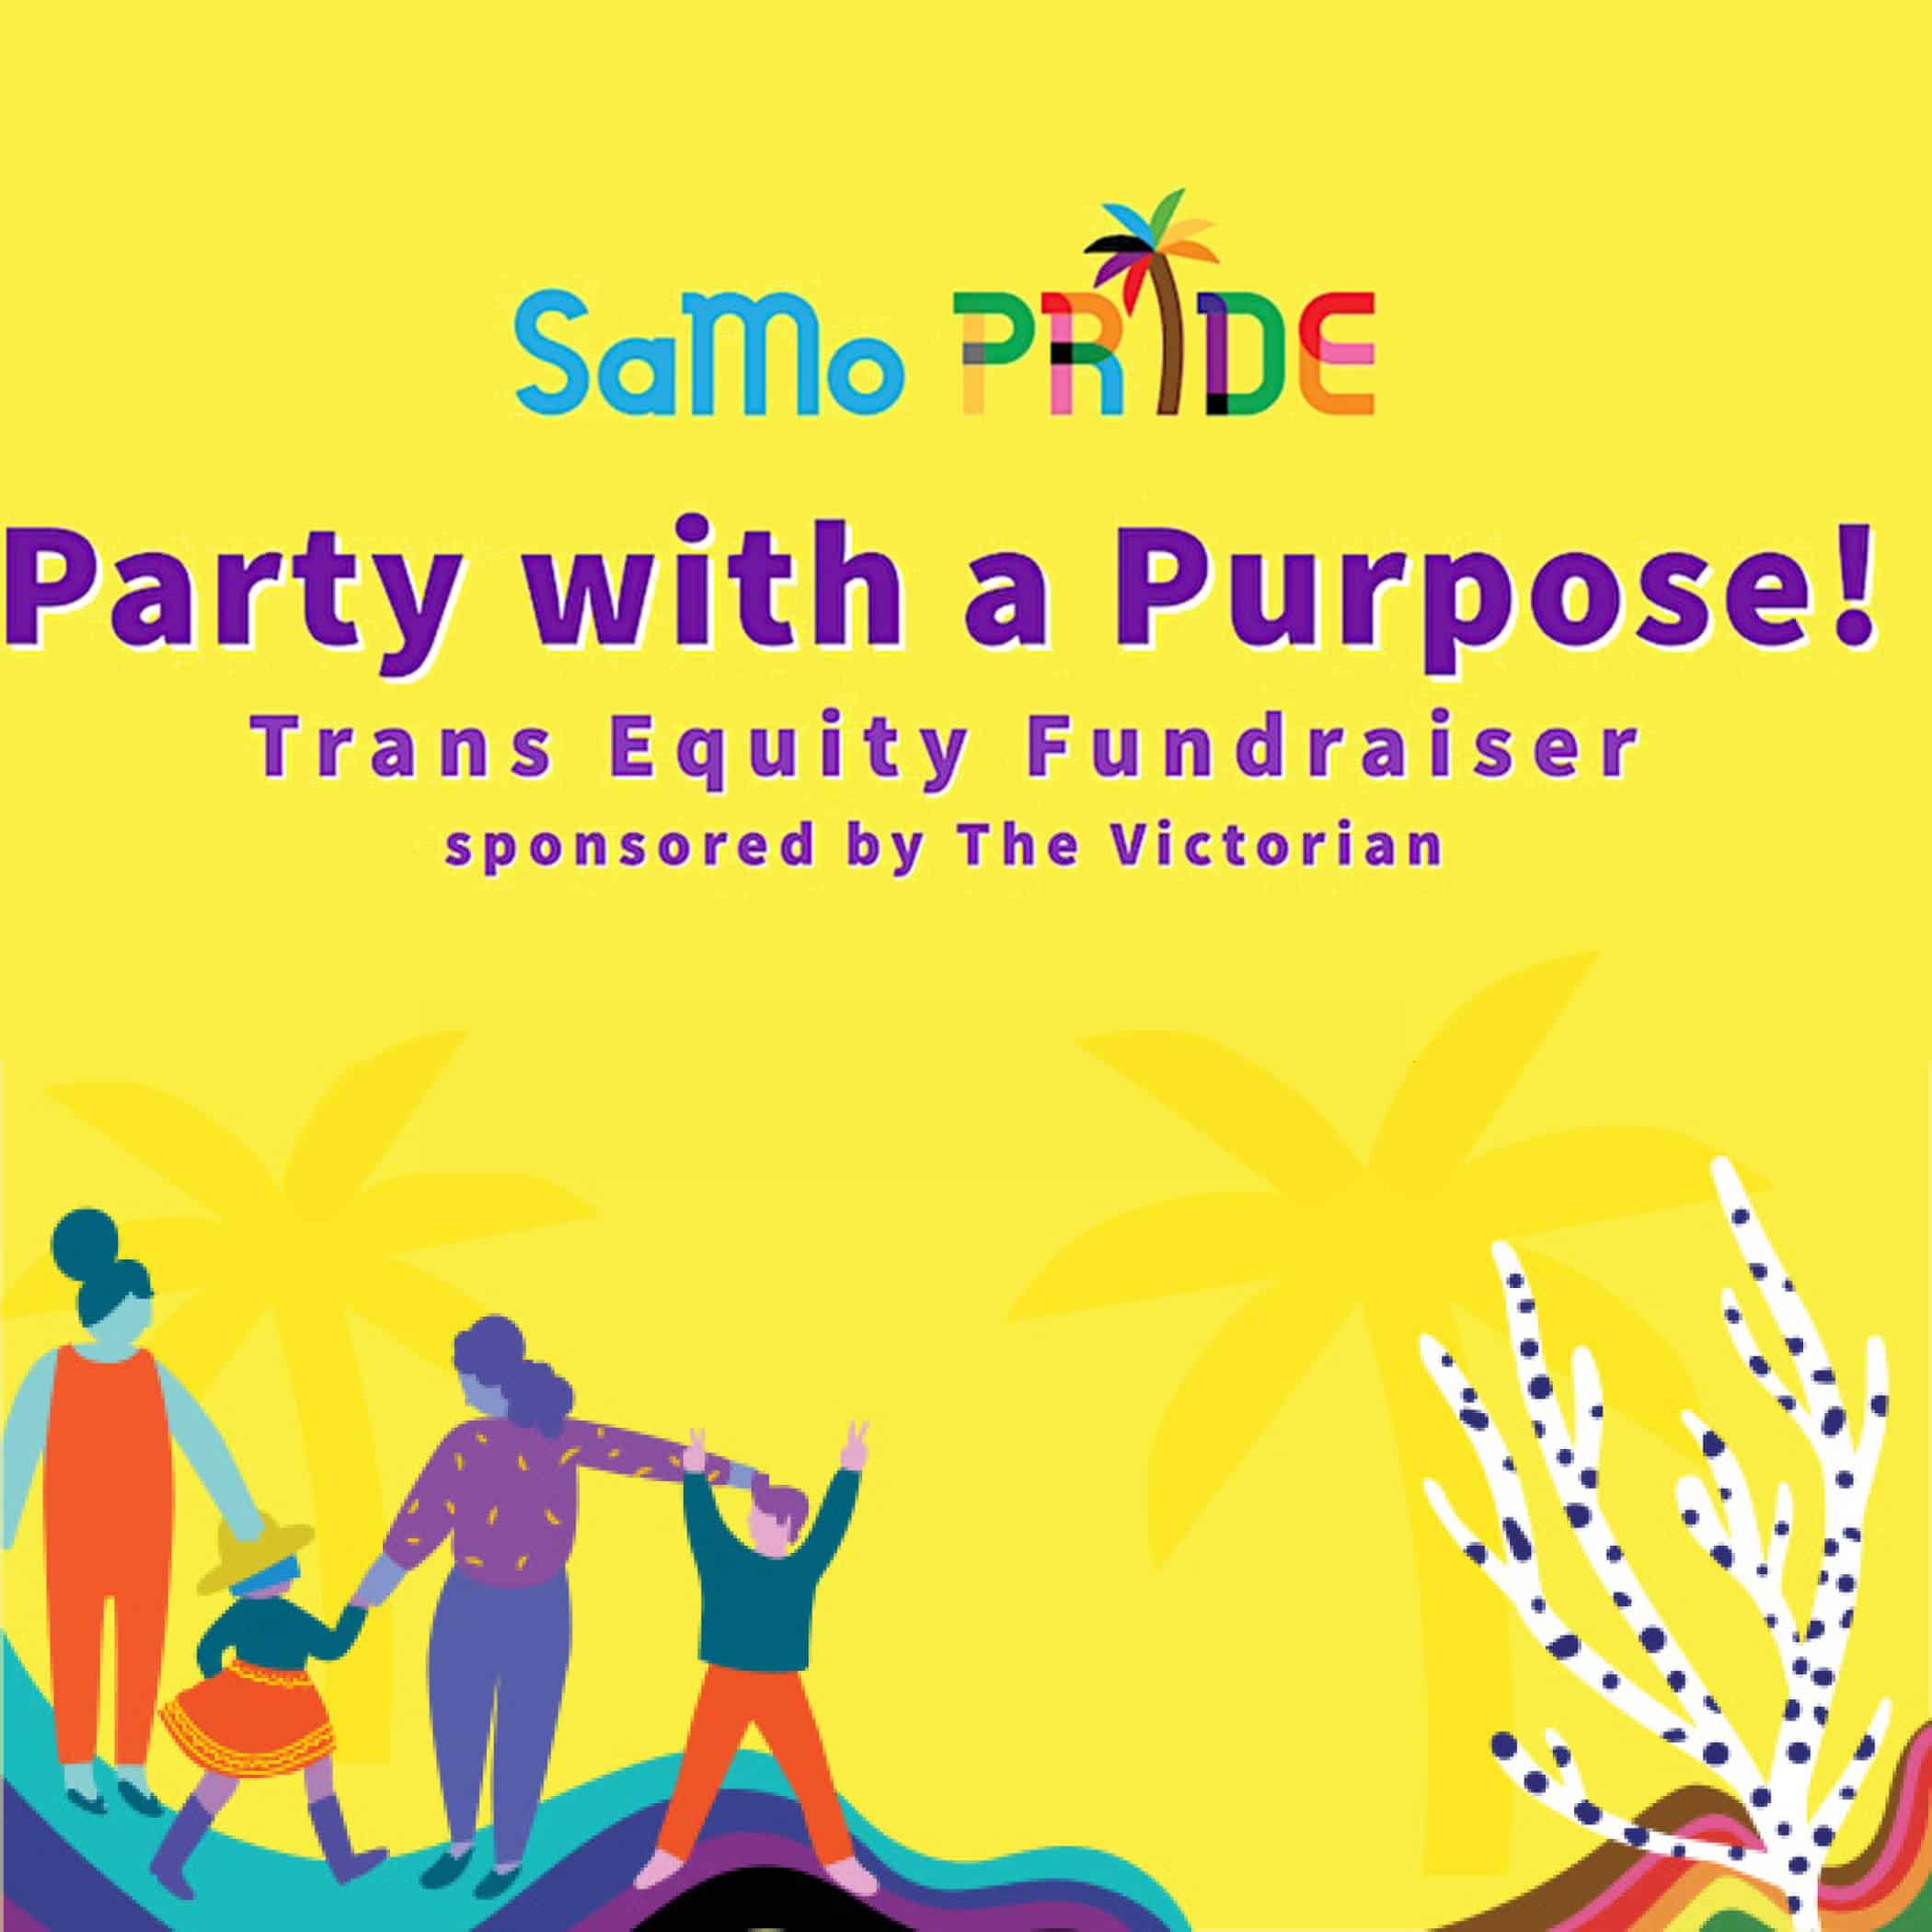 Party with a Purpose